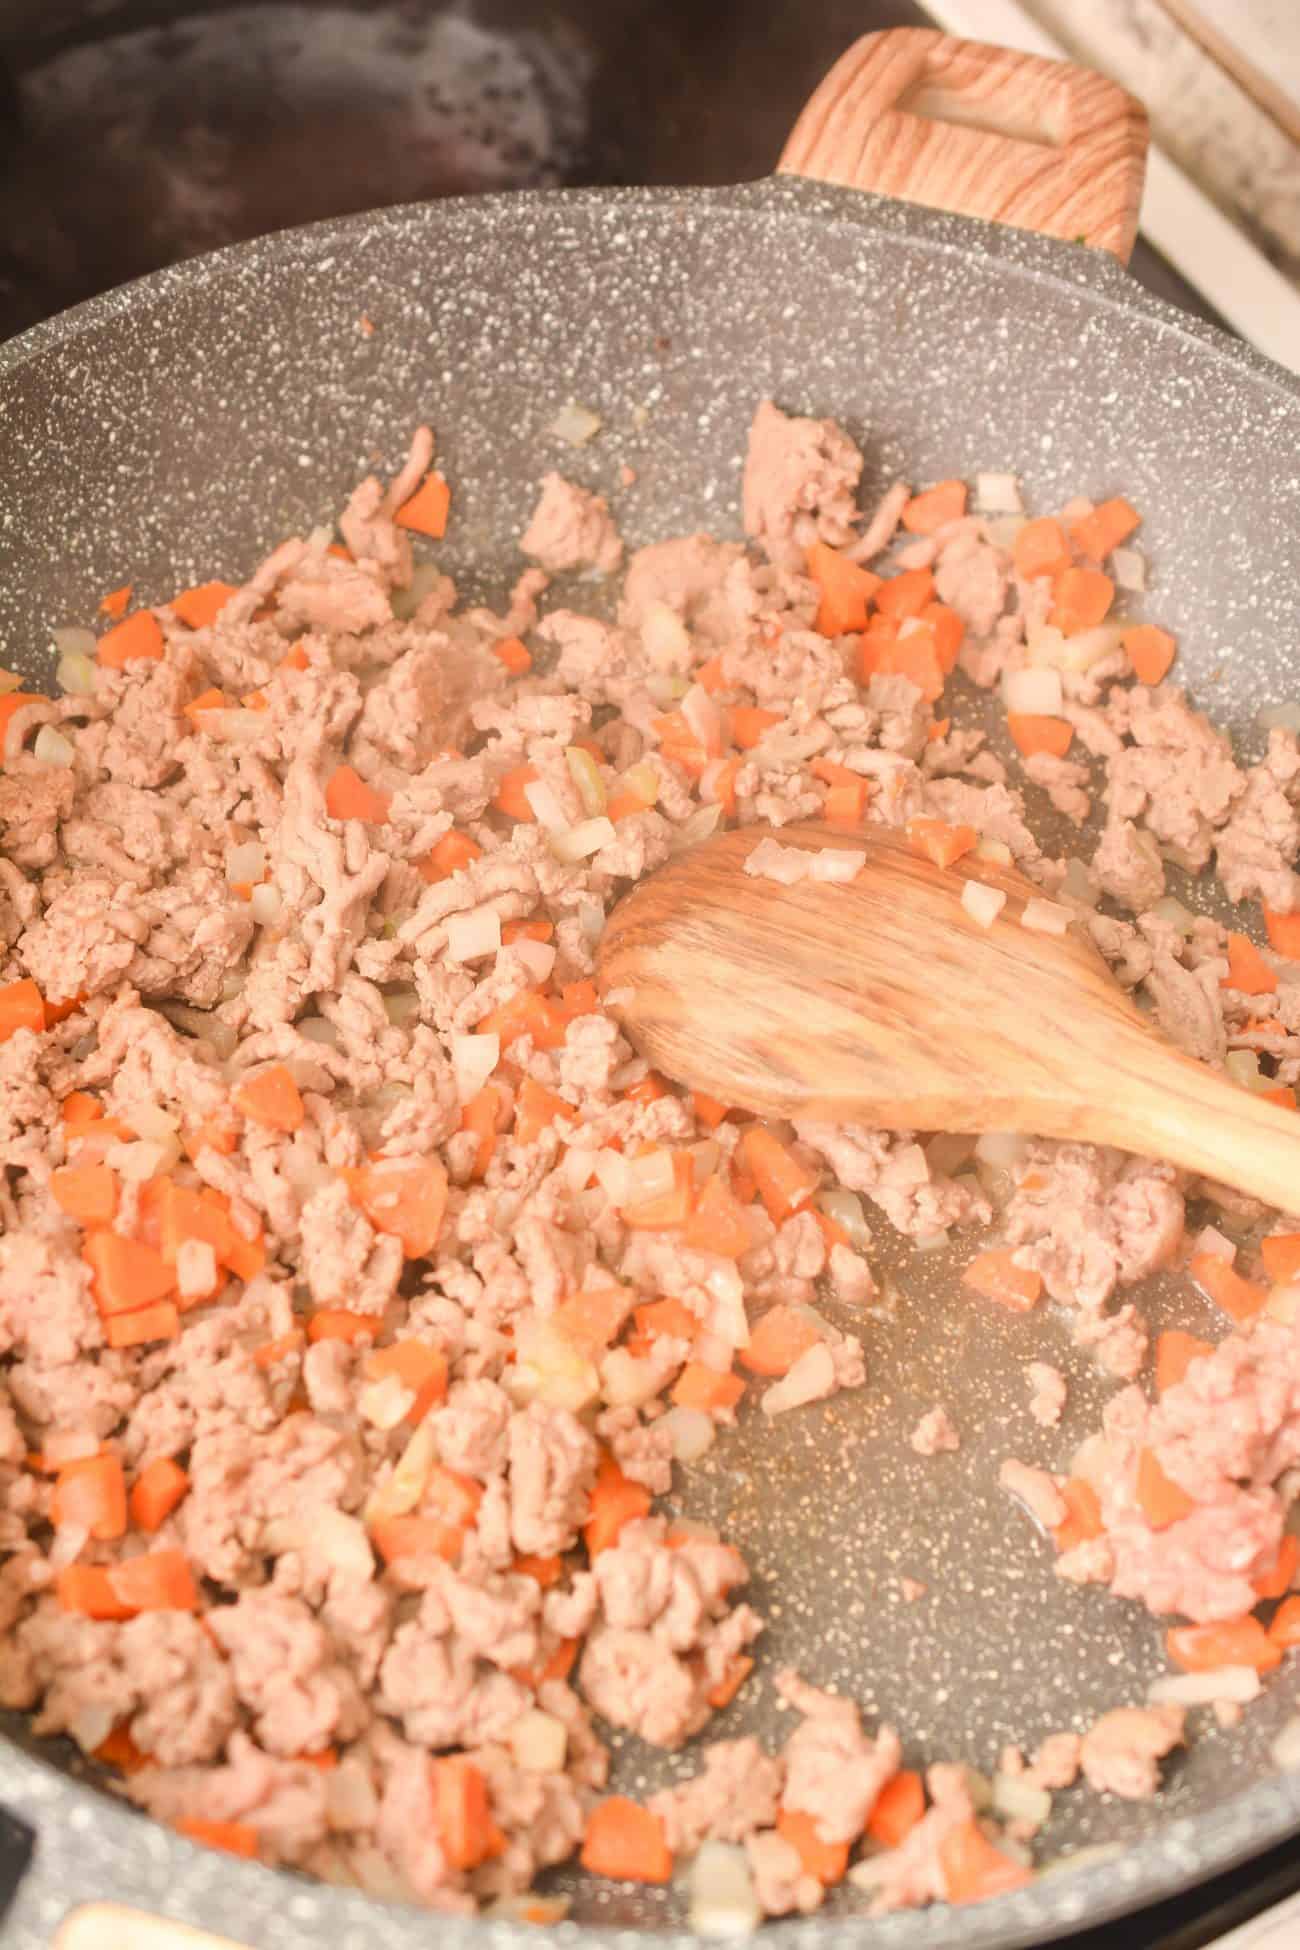 Place the ground pork, onions, and carrots in a skillet over medium-high heat and saute until the meat is completely browned and the vegetables have softened.